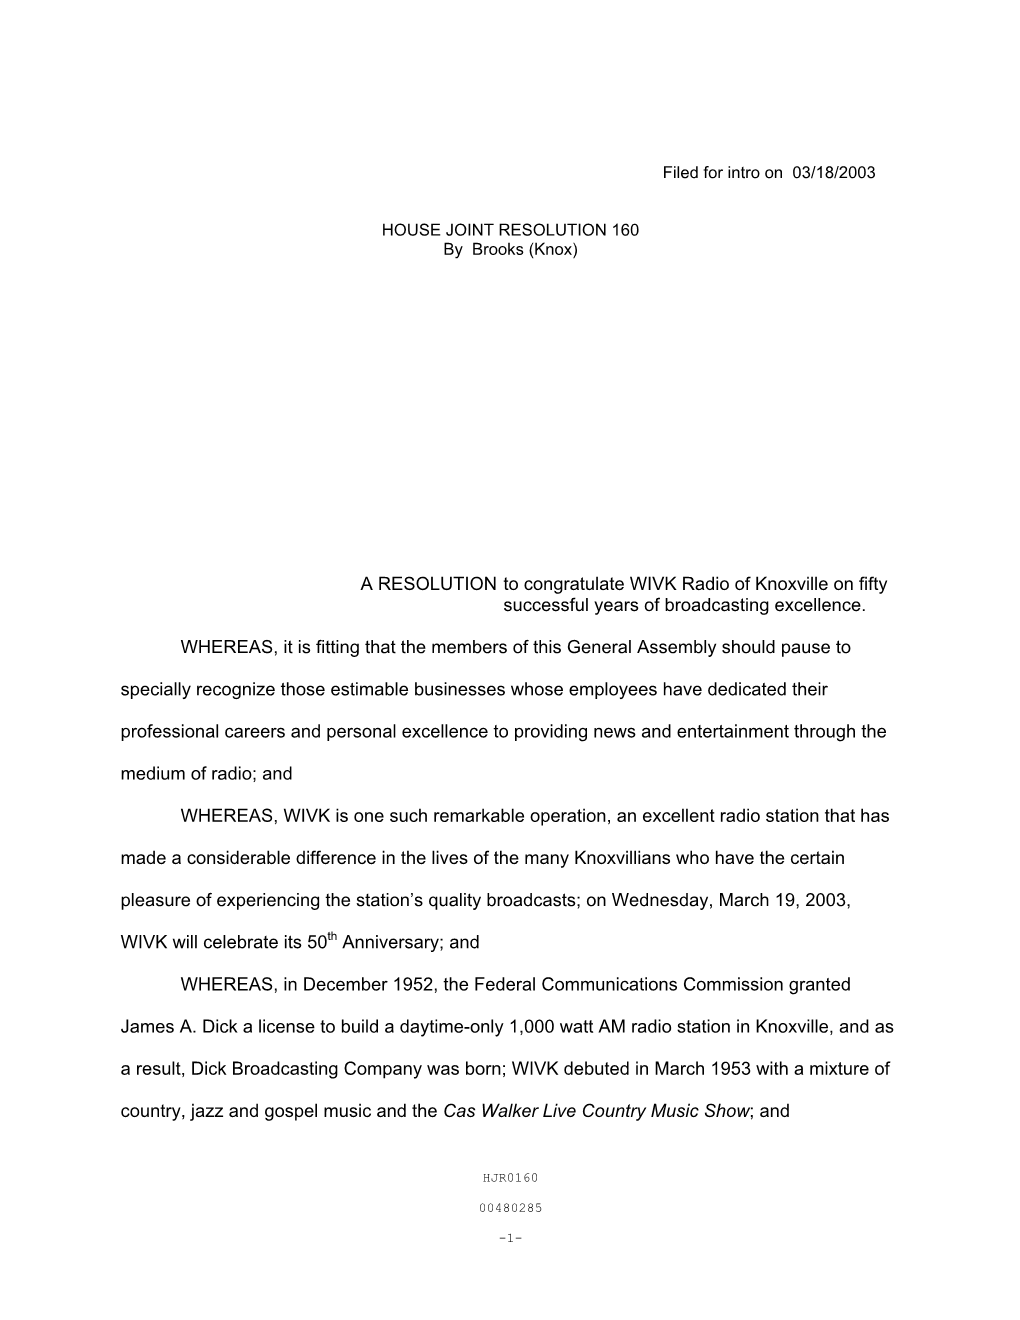 A RESOLUTION to Congratulate WIVK Radio of Knoxville on Fifty Successful Years of Broadcasting Excellence